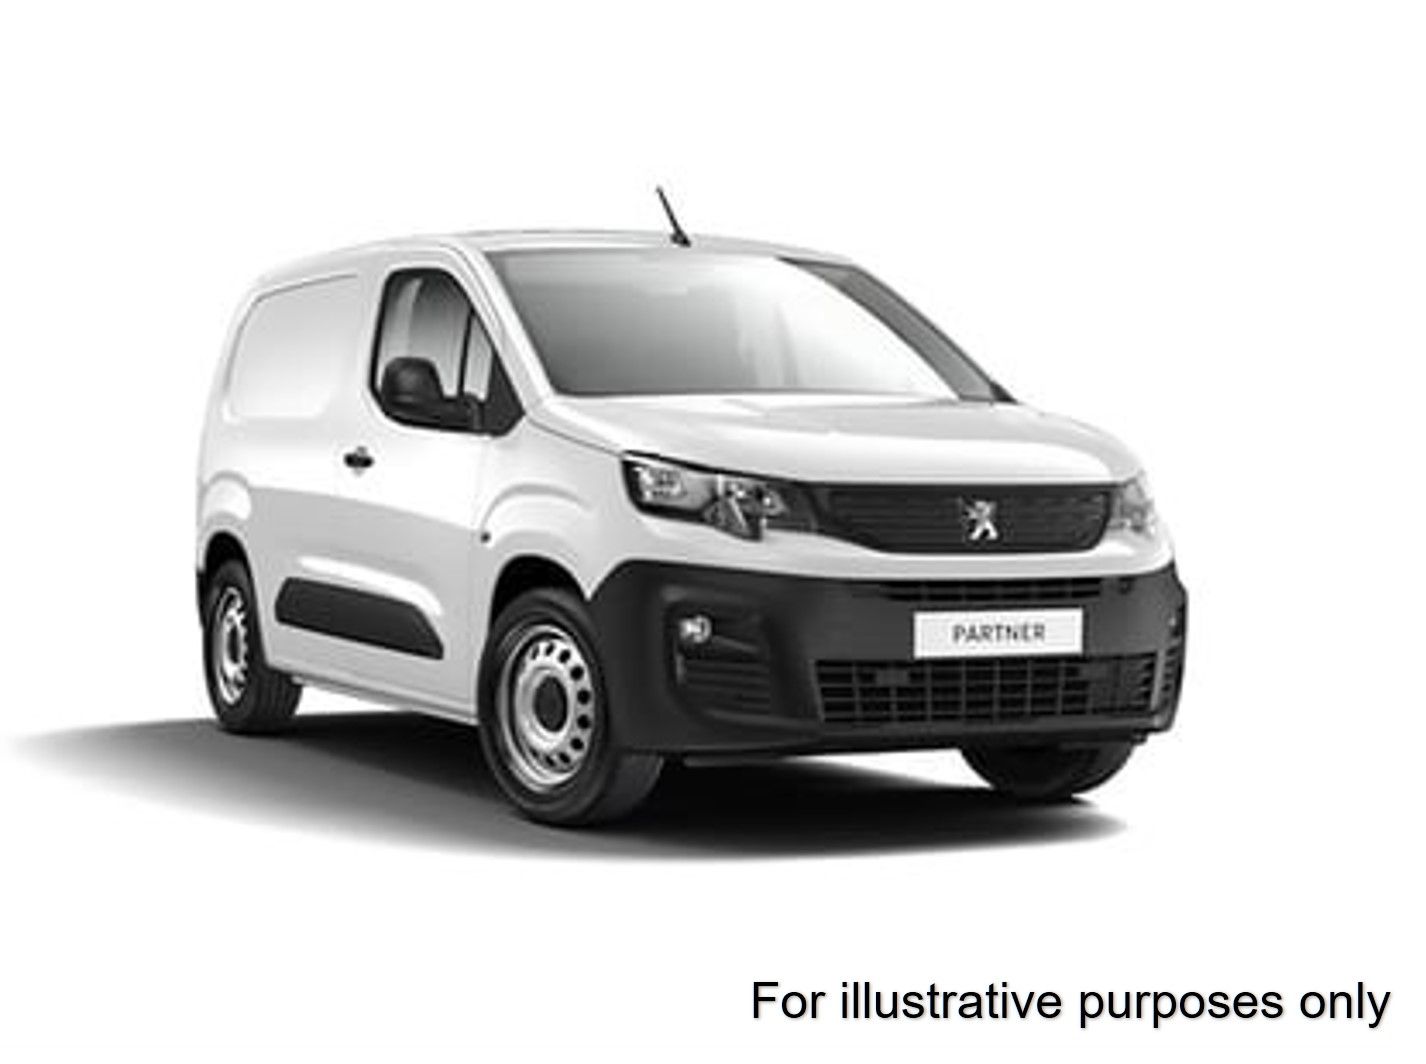 2018 Peugeot Partner 850 1.6 Bluehdi 100 Professional Van [Non Ss]*Limited to 70mph* (NV18OPE)